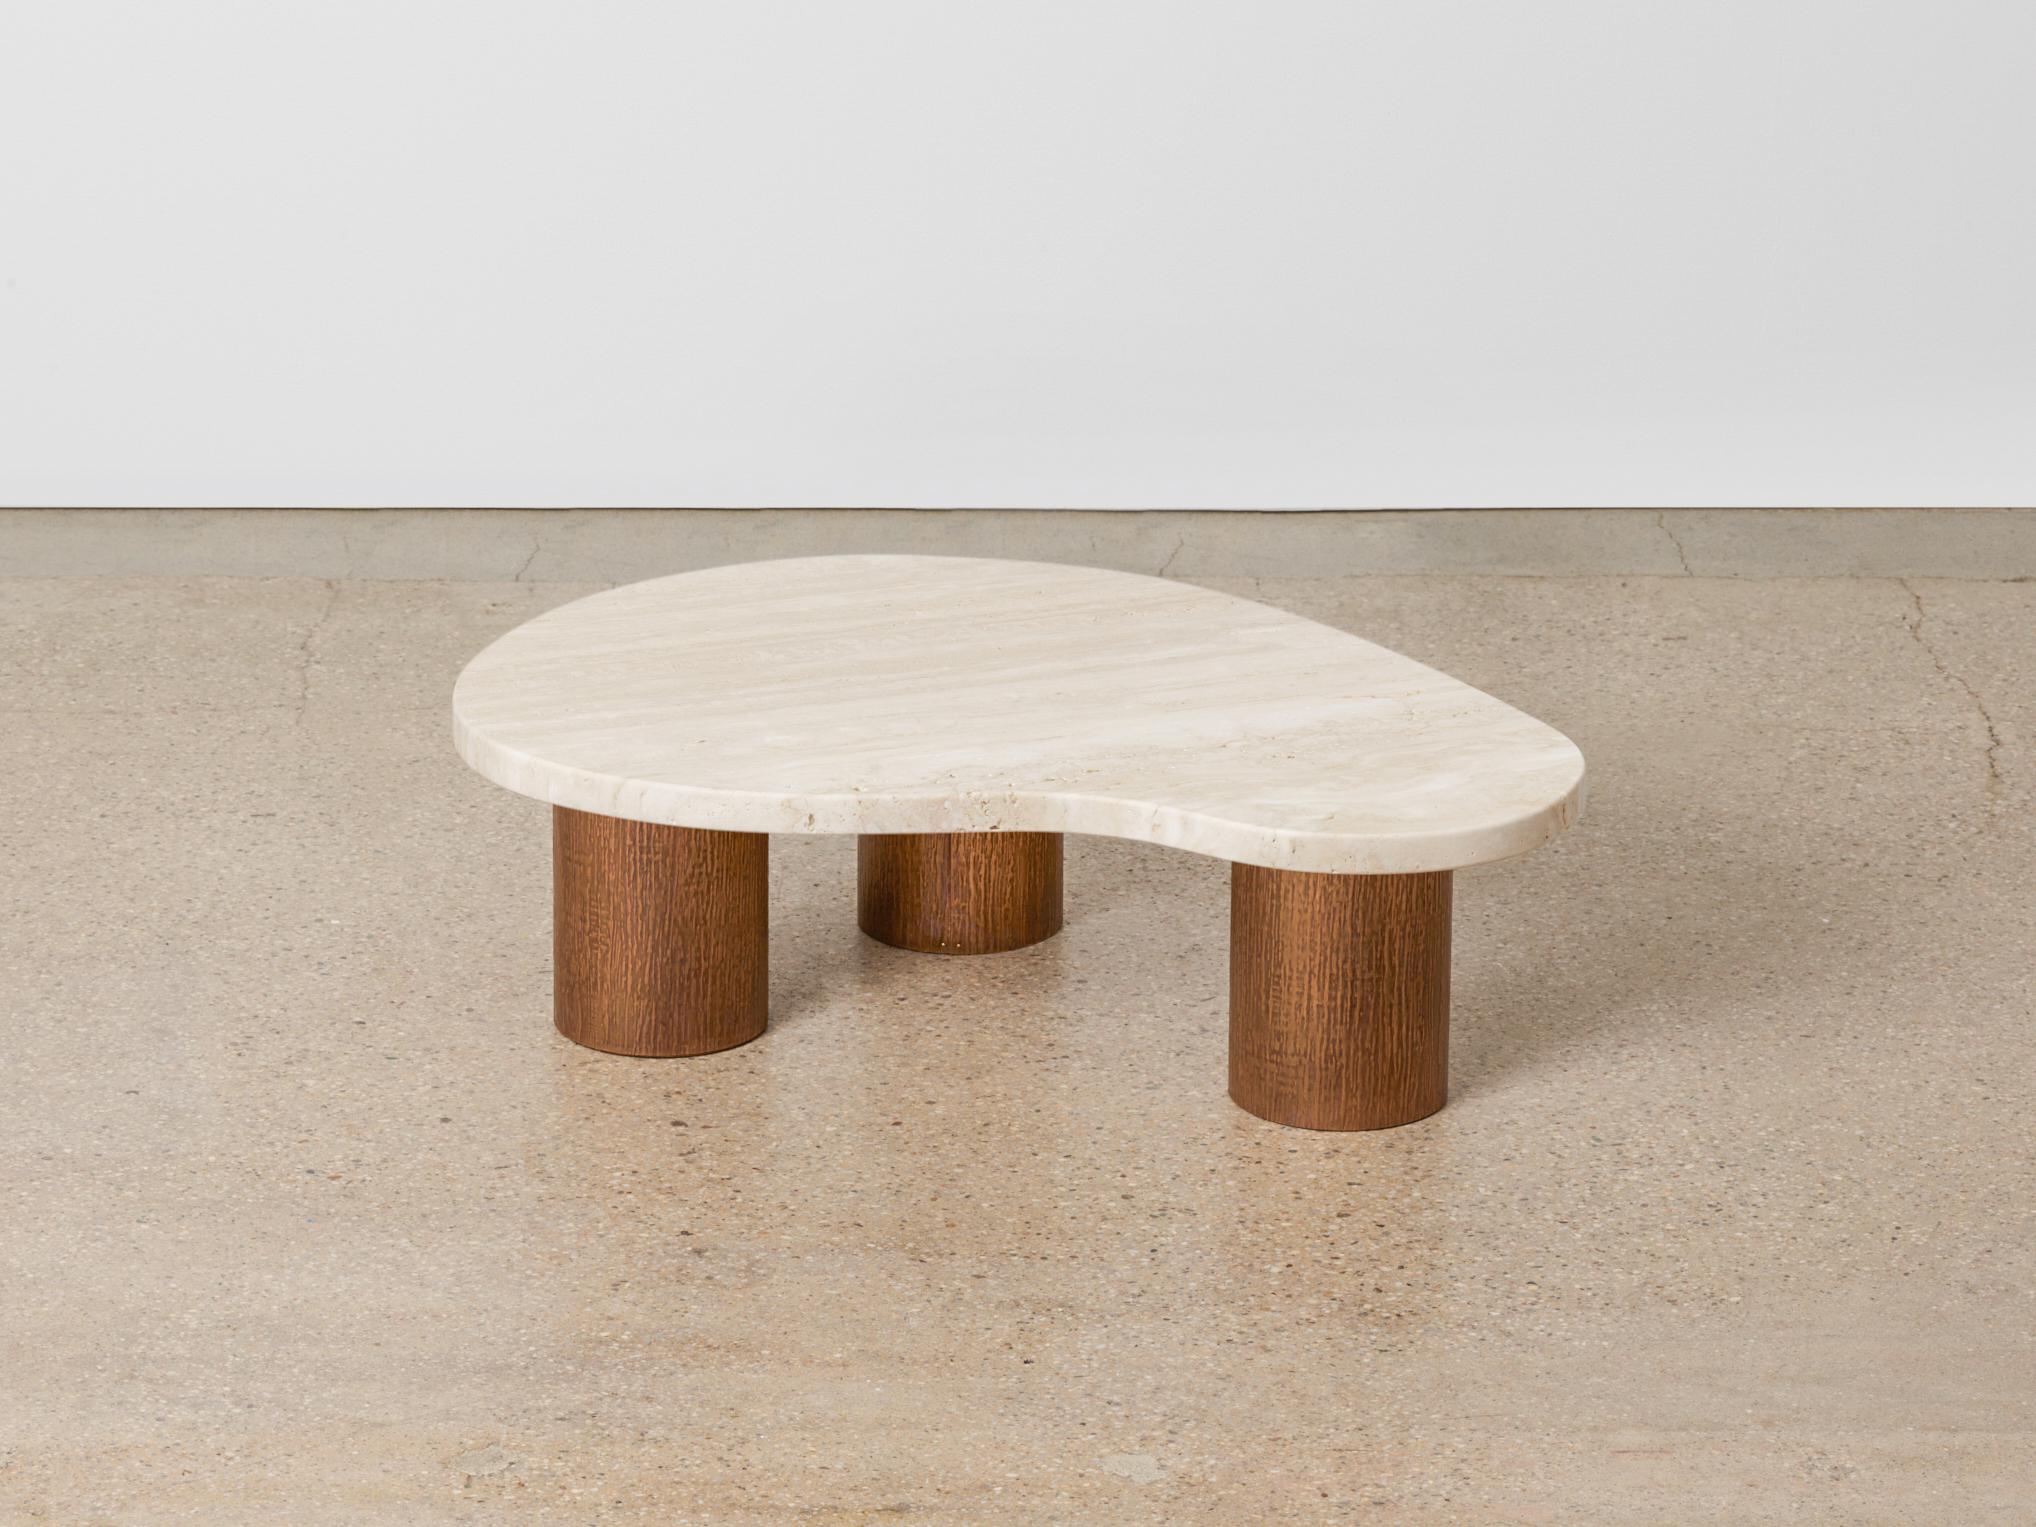 Large Andrea nesting table by Umberto Bellardi Ricci
Dimensions: D 94 x W 71 x H 28 cm.
Materials: Travertine, bronze legs.

Umberto Bellardi Ricci is an Italian sculptor and architect based in New York City, practicing across London, Mexico,